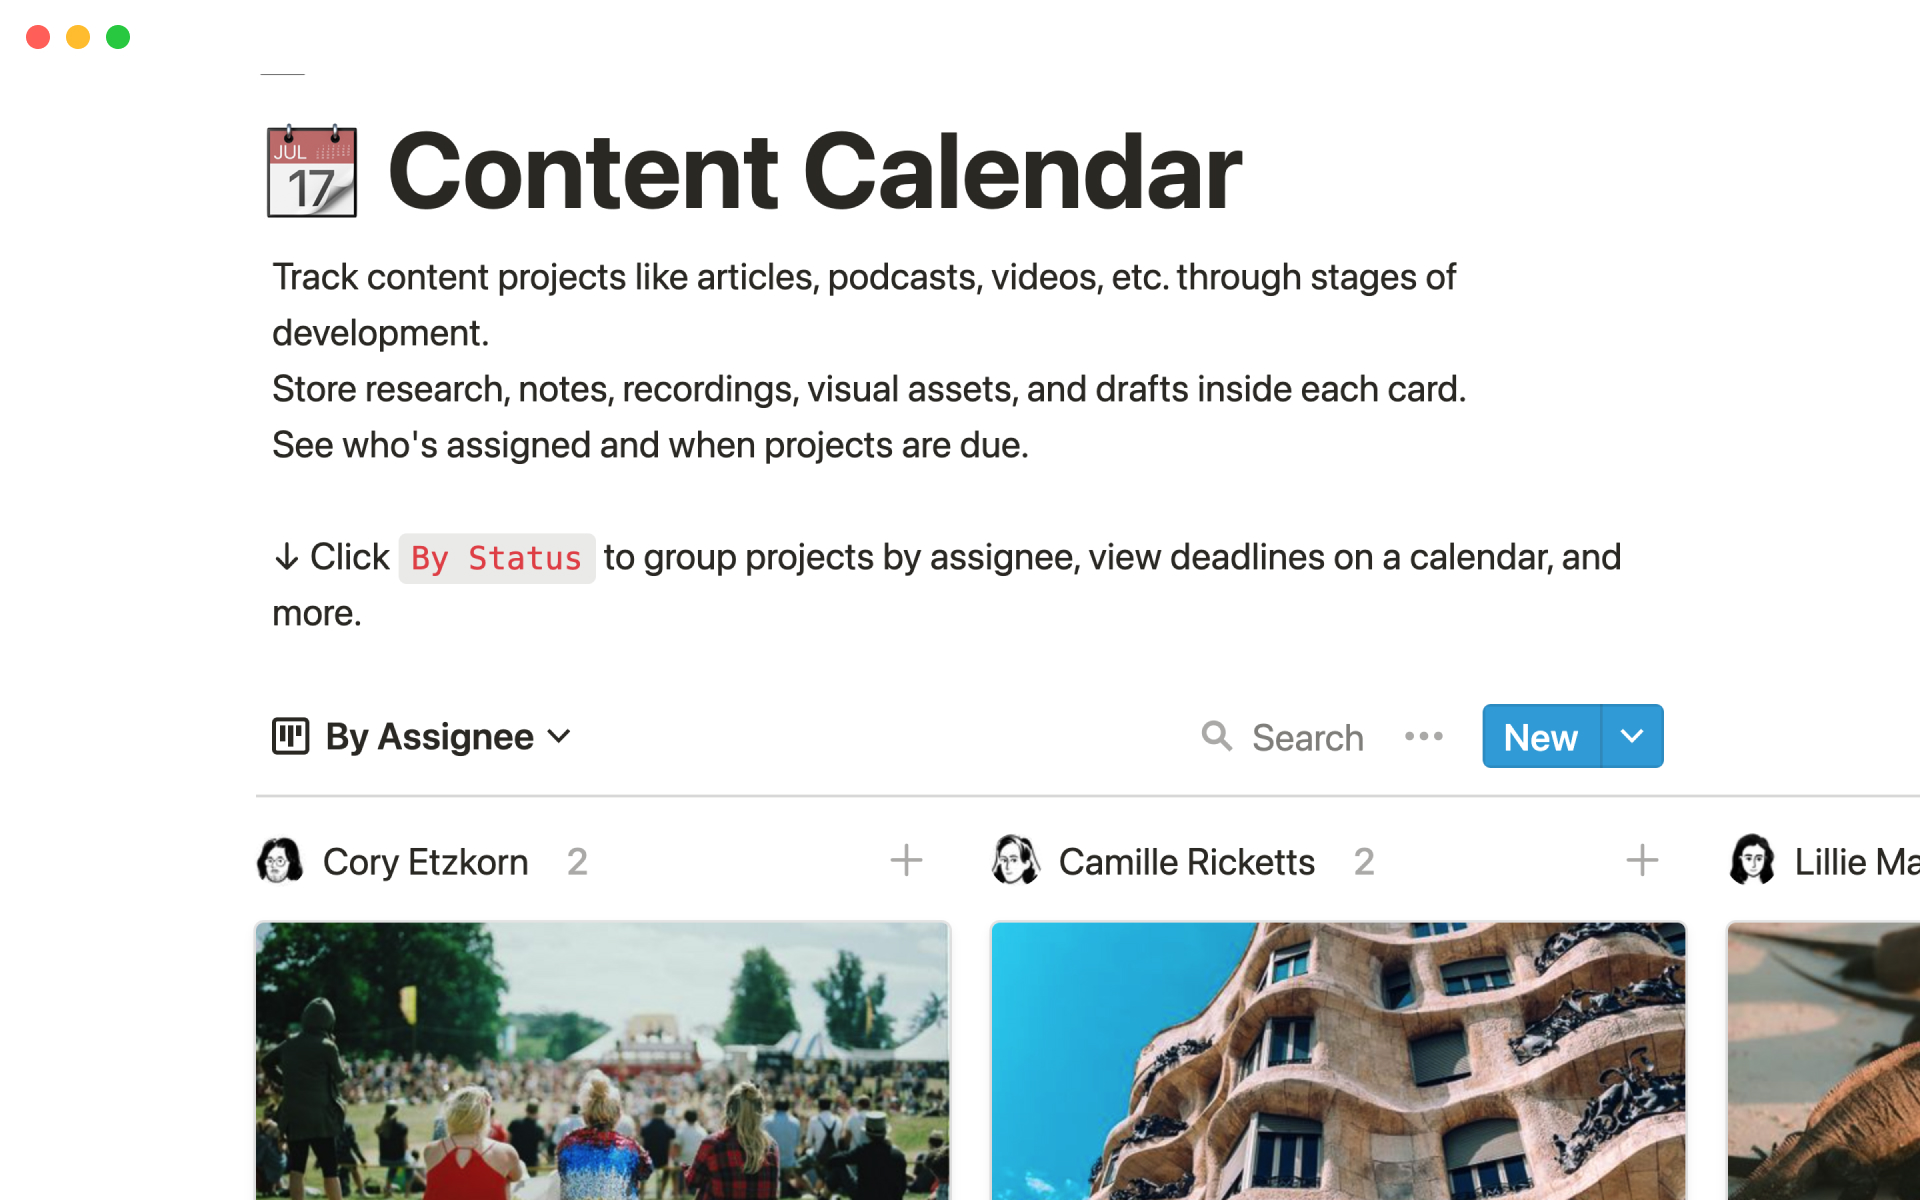 Use this content calendar to schedule and track all the content you're putting out — from blog posts to podcasts to tweets.